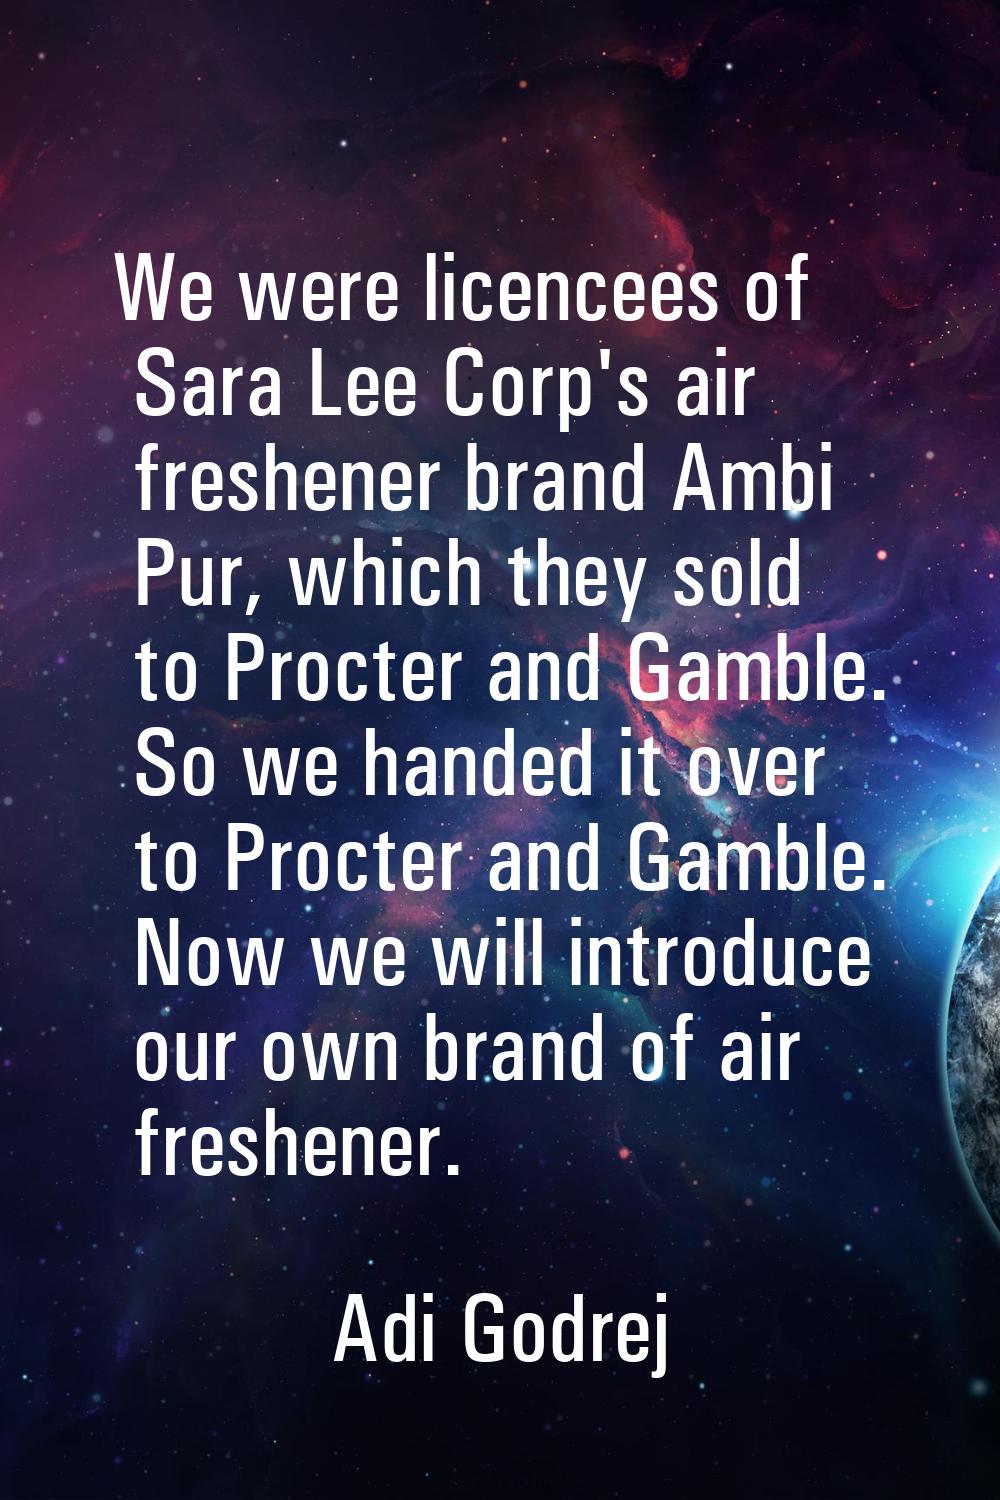 We were licencees of Sara Lee Corp's air freshener brand Ambi Pur, which they sold to Procter and G